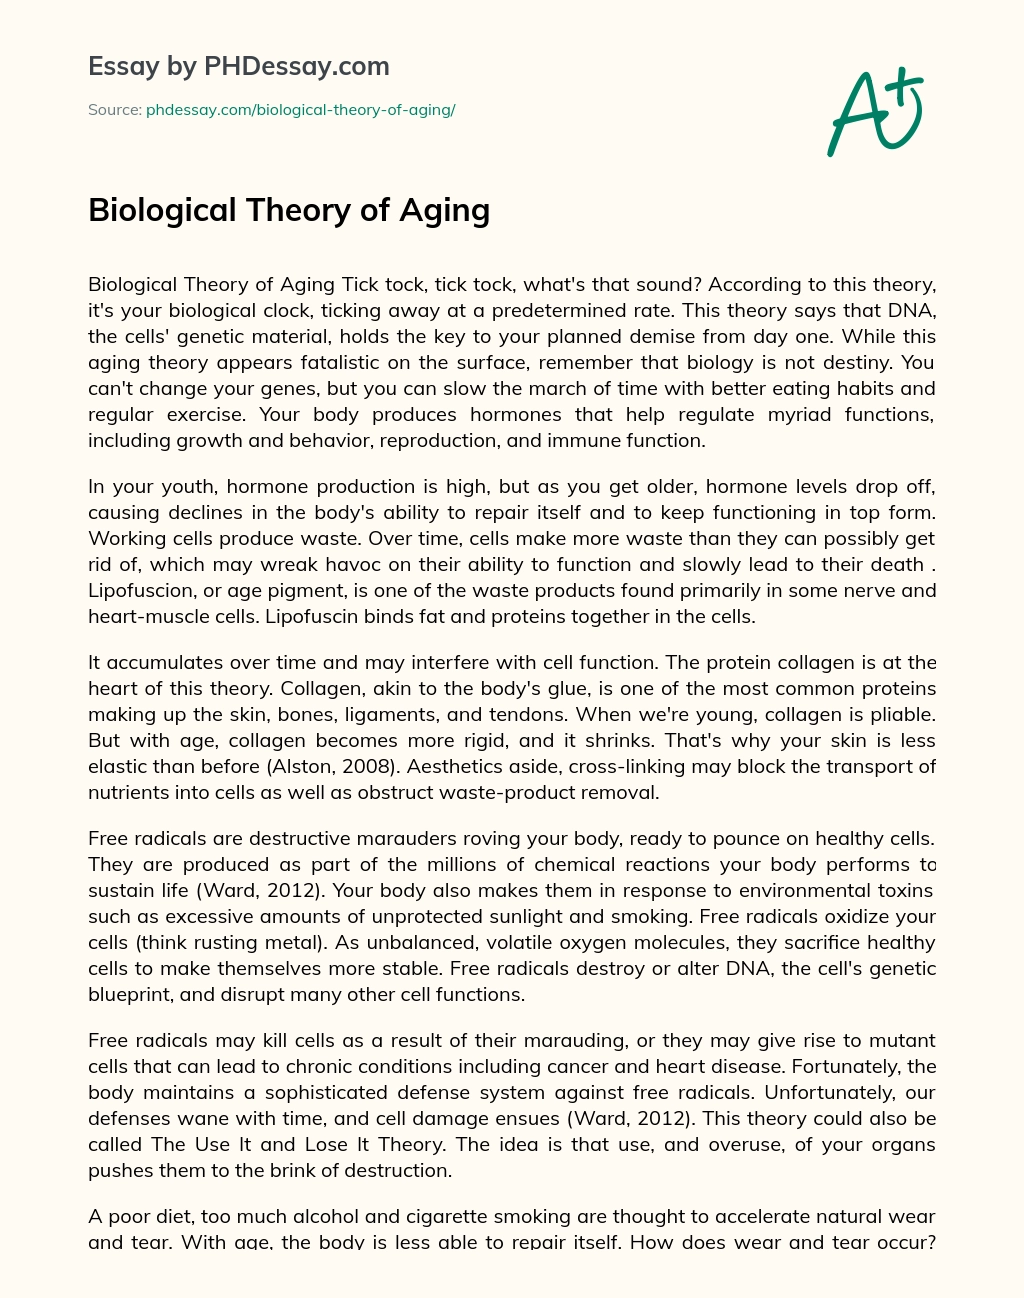 Biological Theory of Aging essay